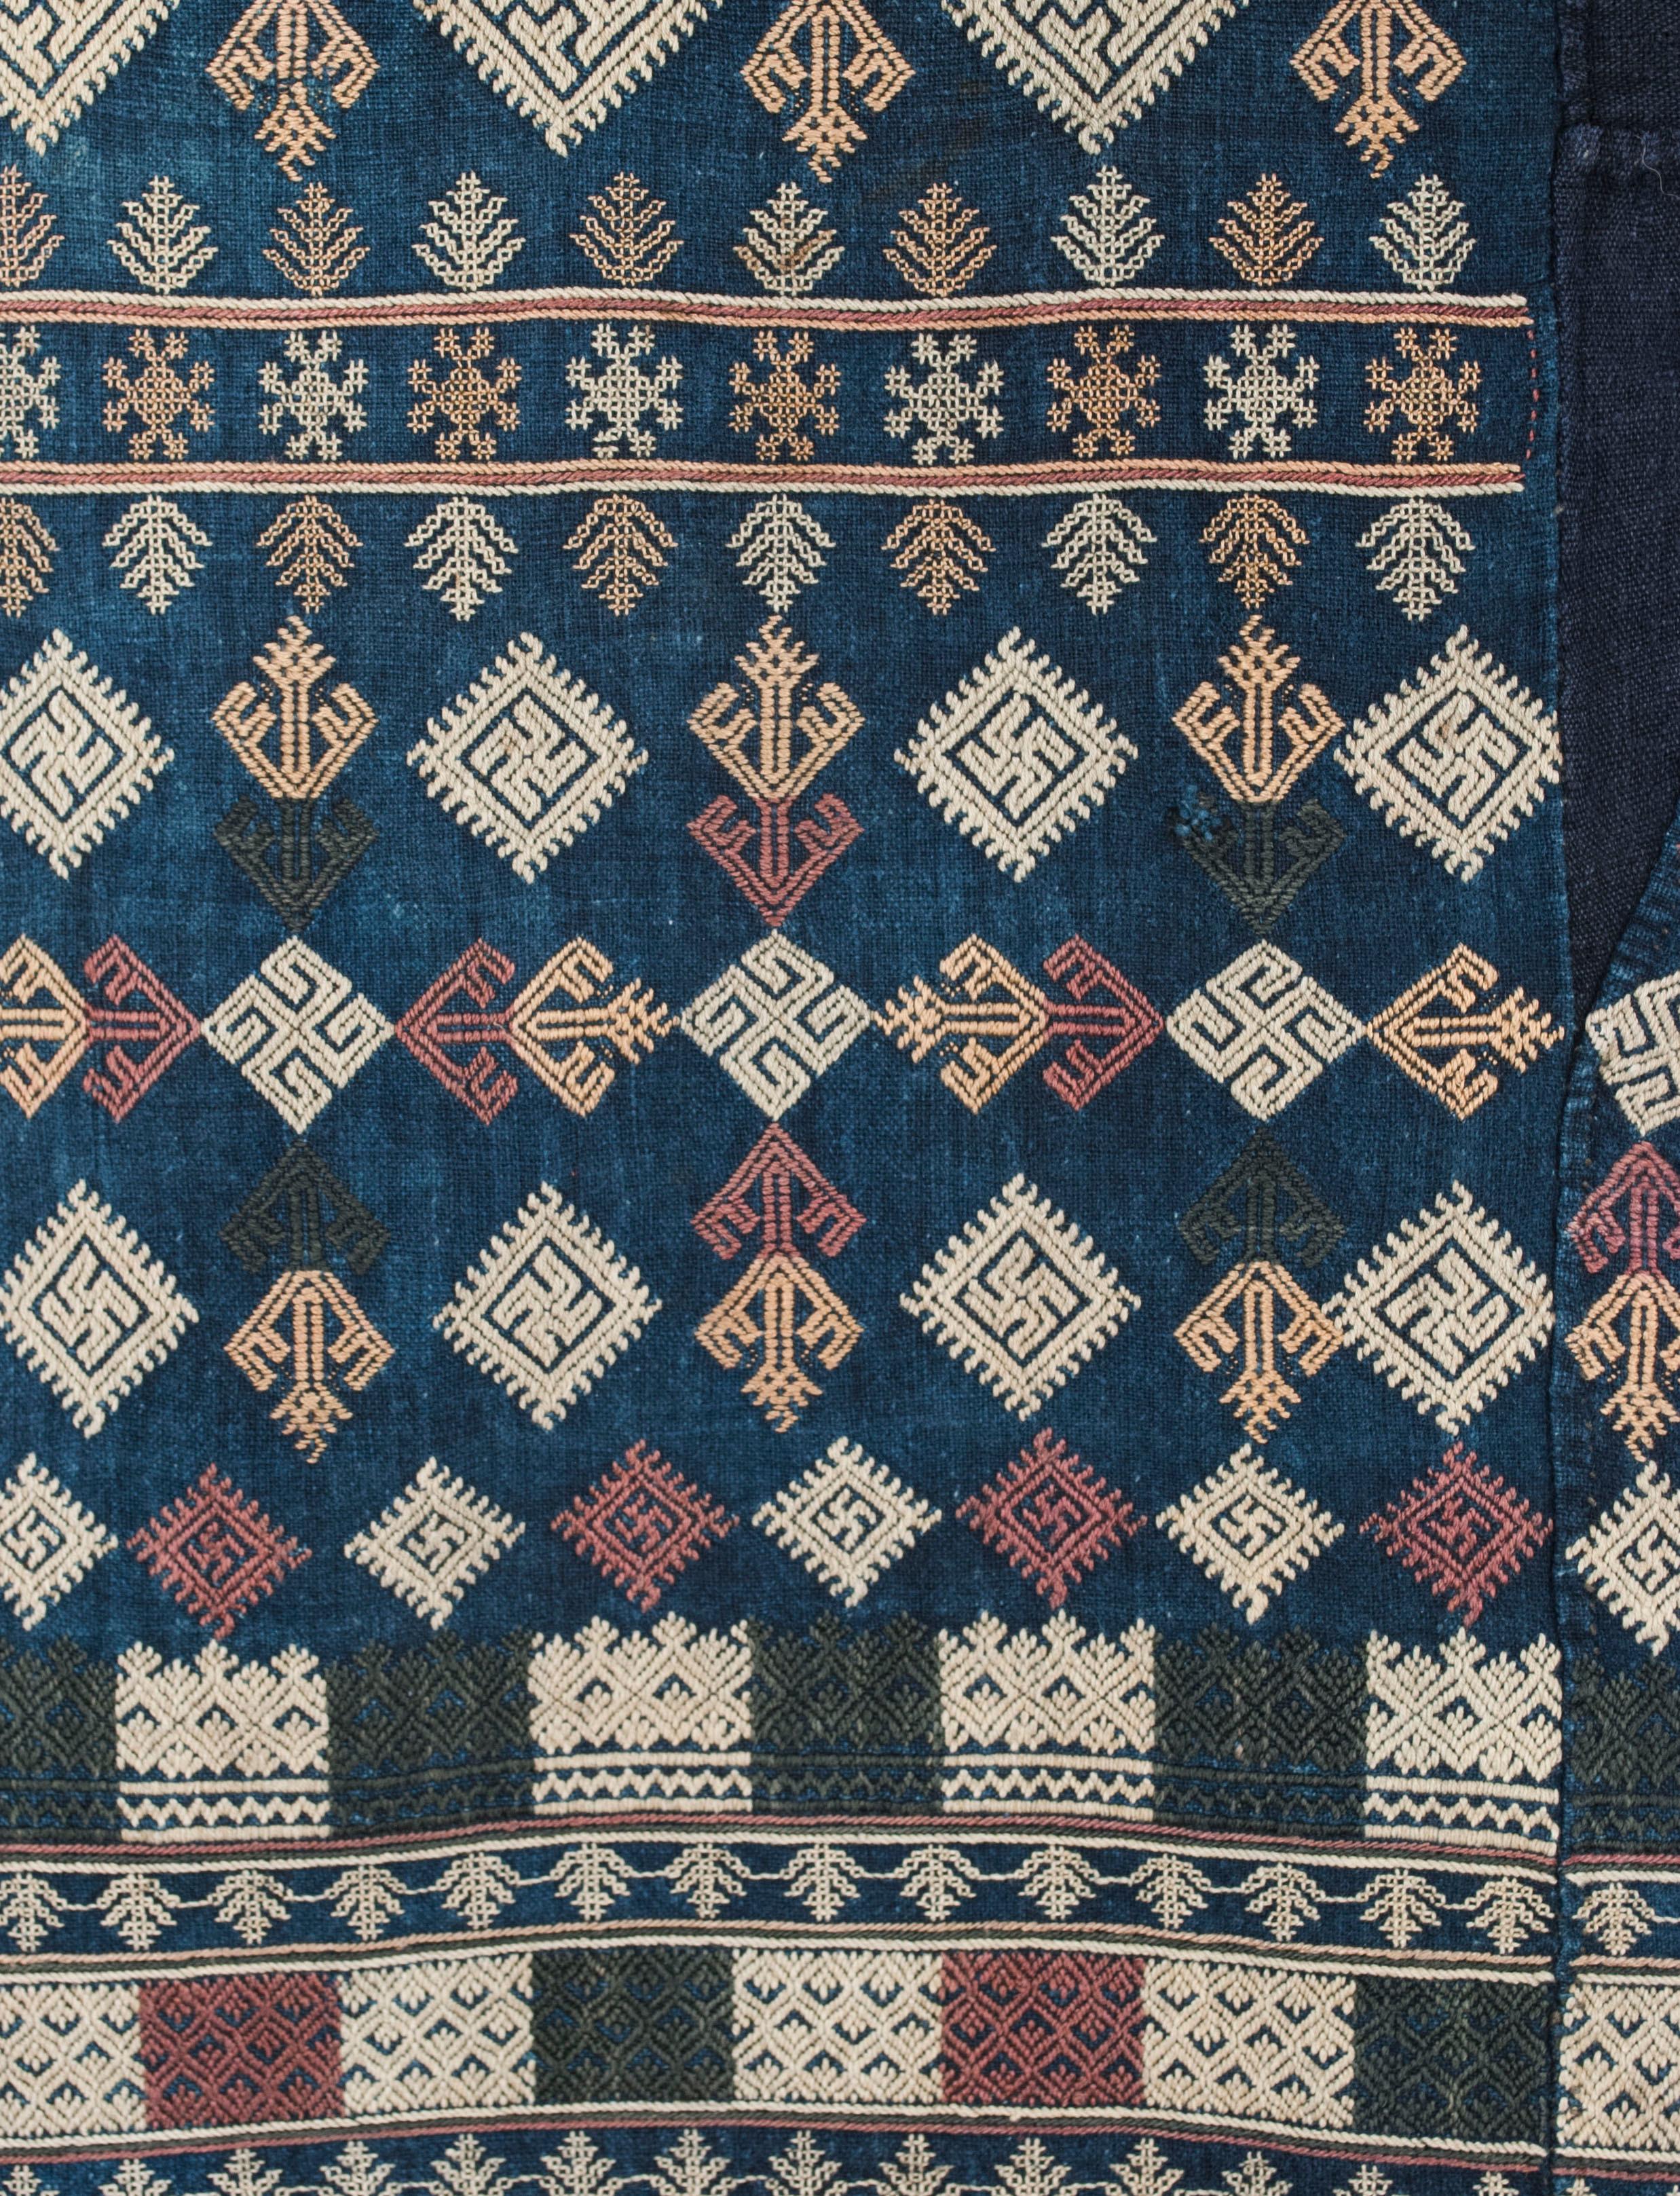 Mid 20th century Yao Group embroidered pants

The muted earth tones of the patterns on these embroidered pants are typical of the work done by the Yao ethnic group in northern Laos before the use of aniline dyes. The precision of the embroidery